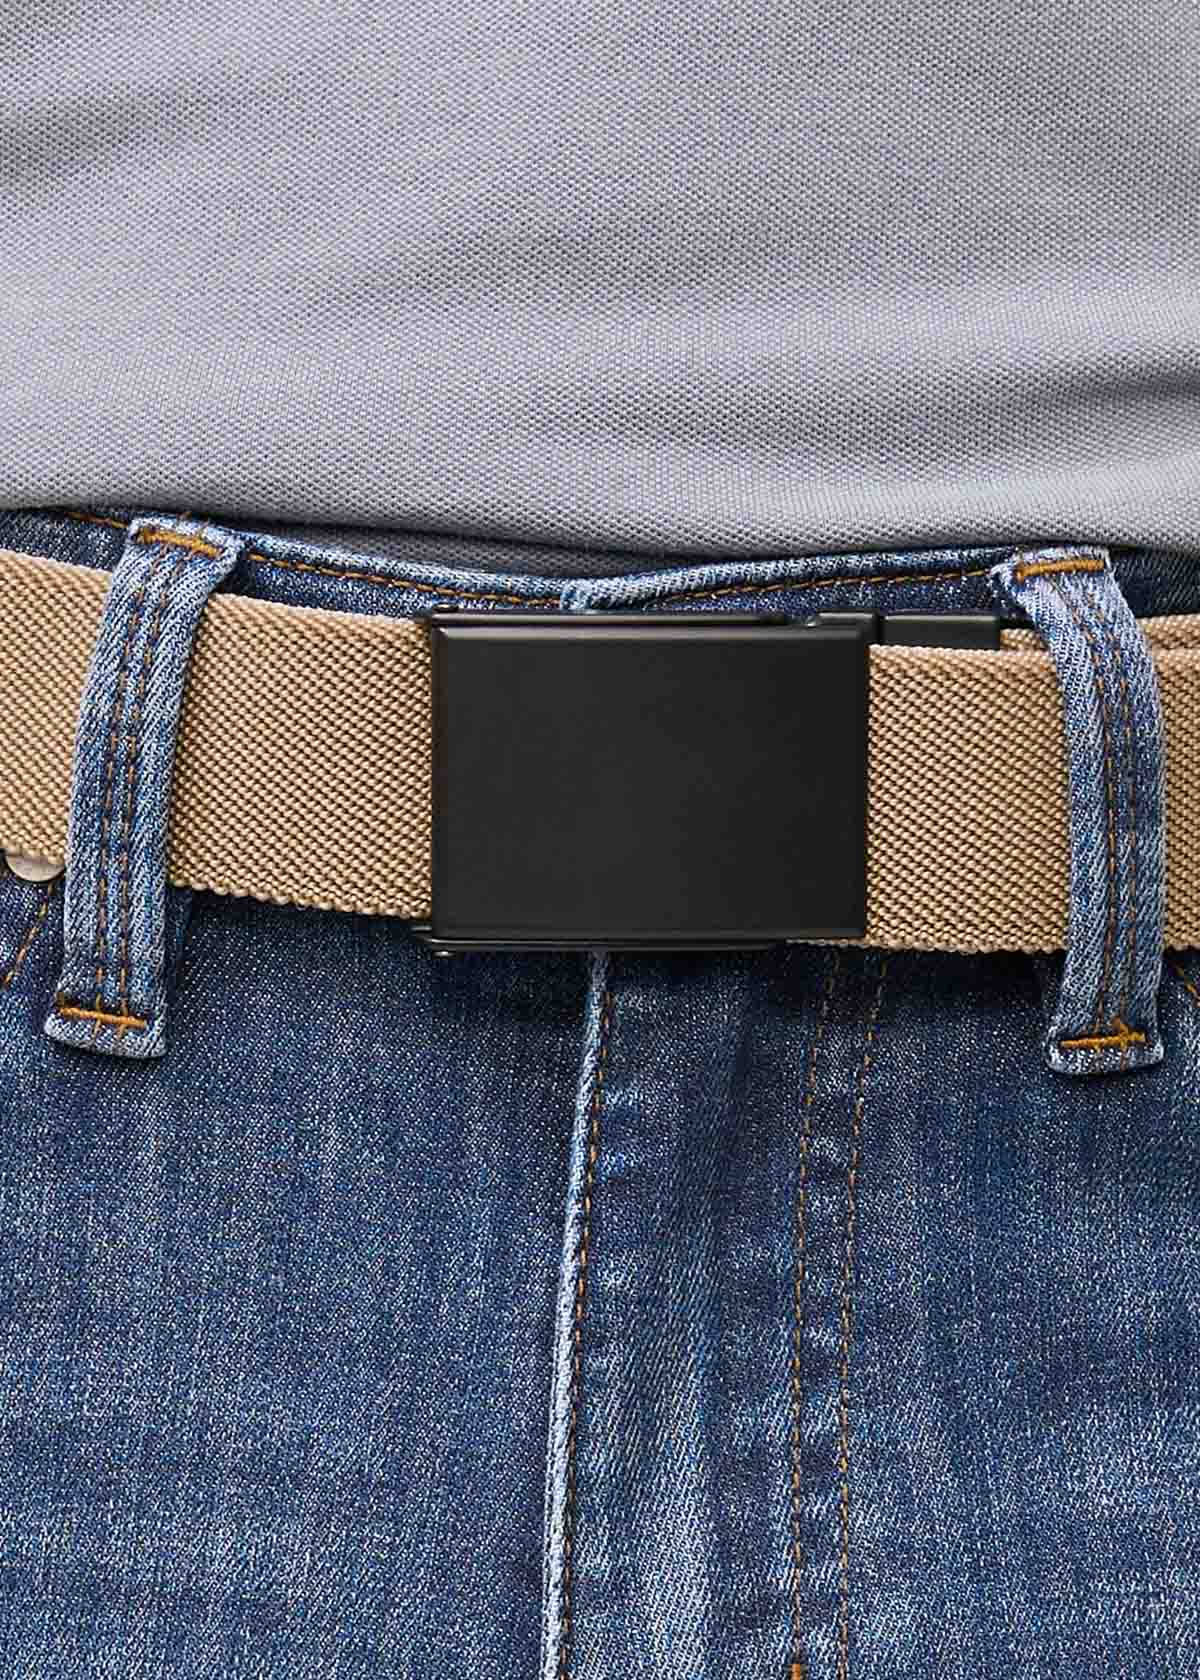 mens silver and tan reversible stretch belt buckle detail